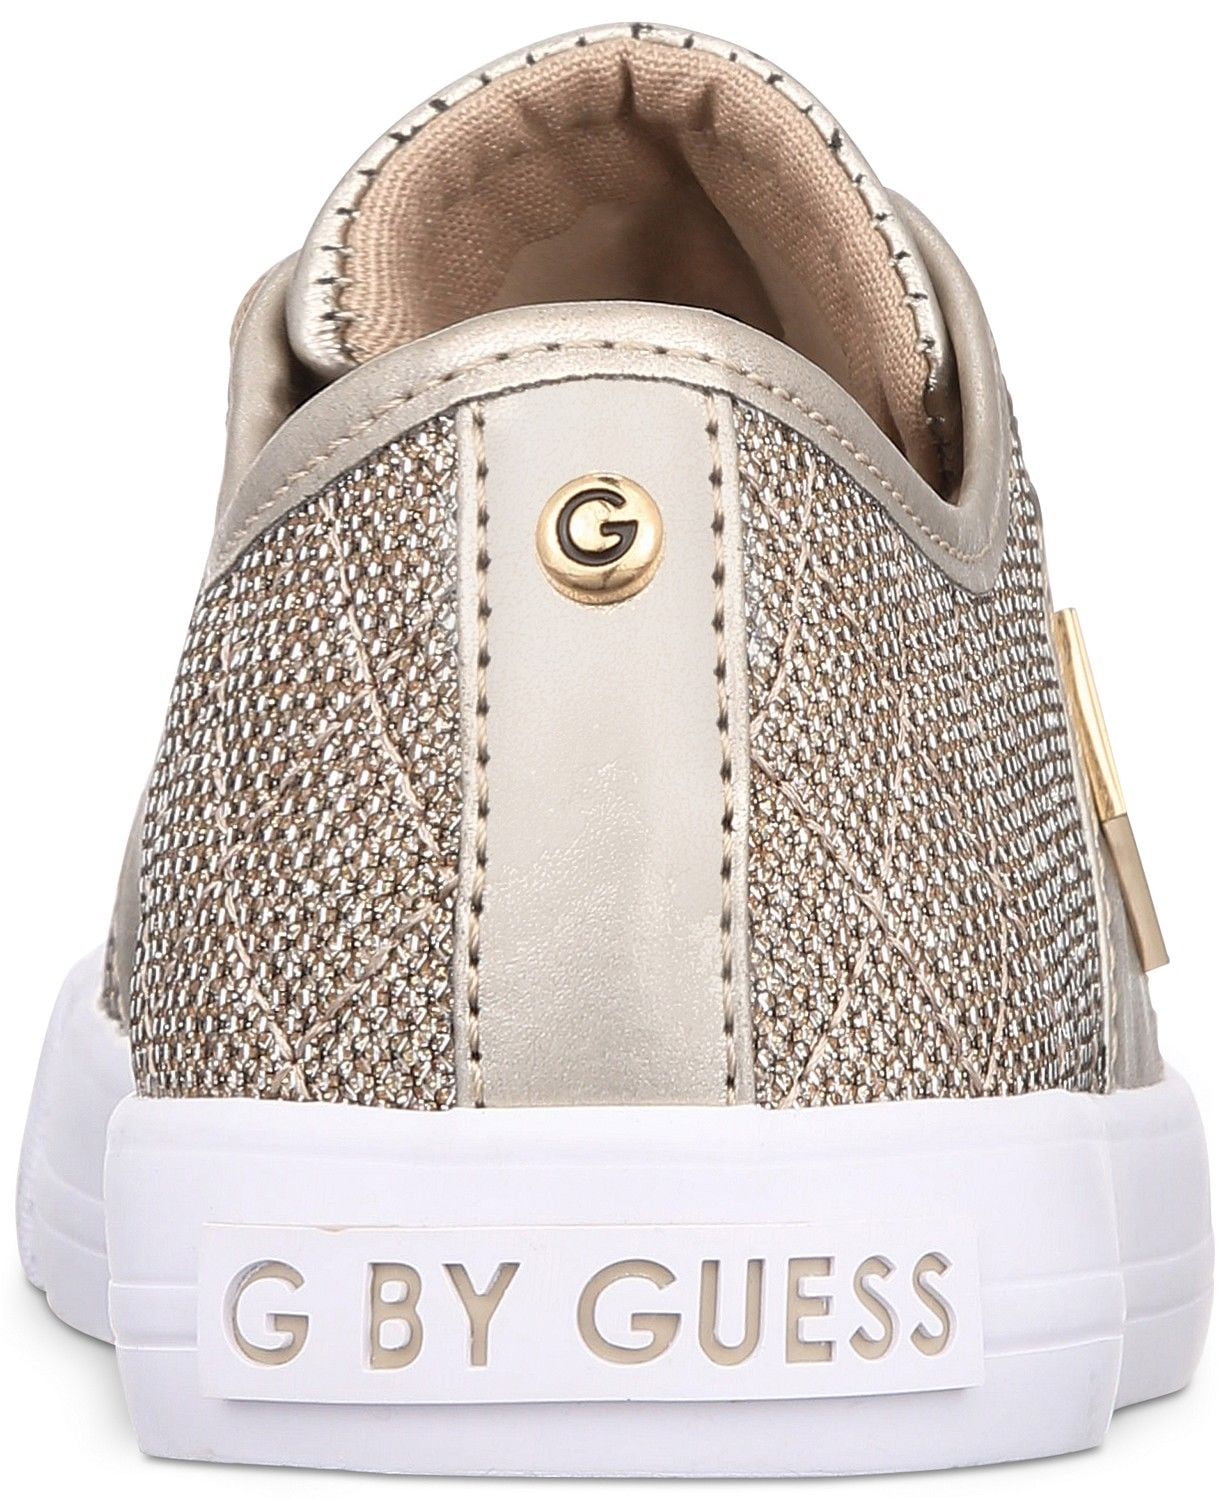 G by Guess Women's Lace Up Leather Quilted Fabric Glitter Sneakers Shoes (6) - Walmart.com